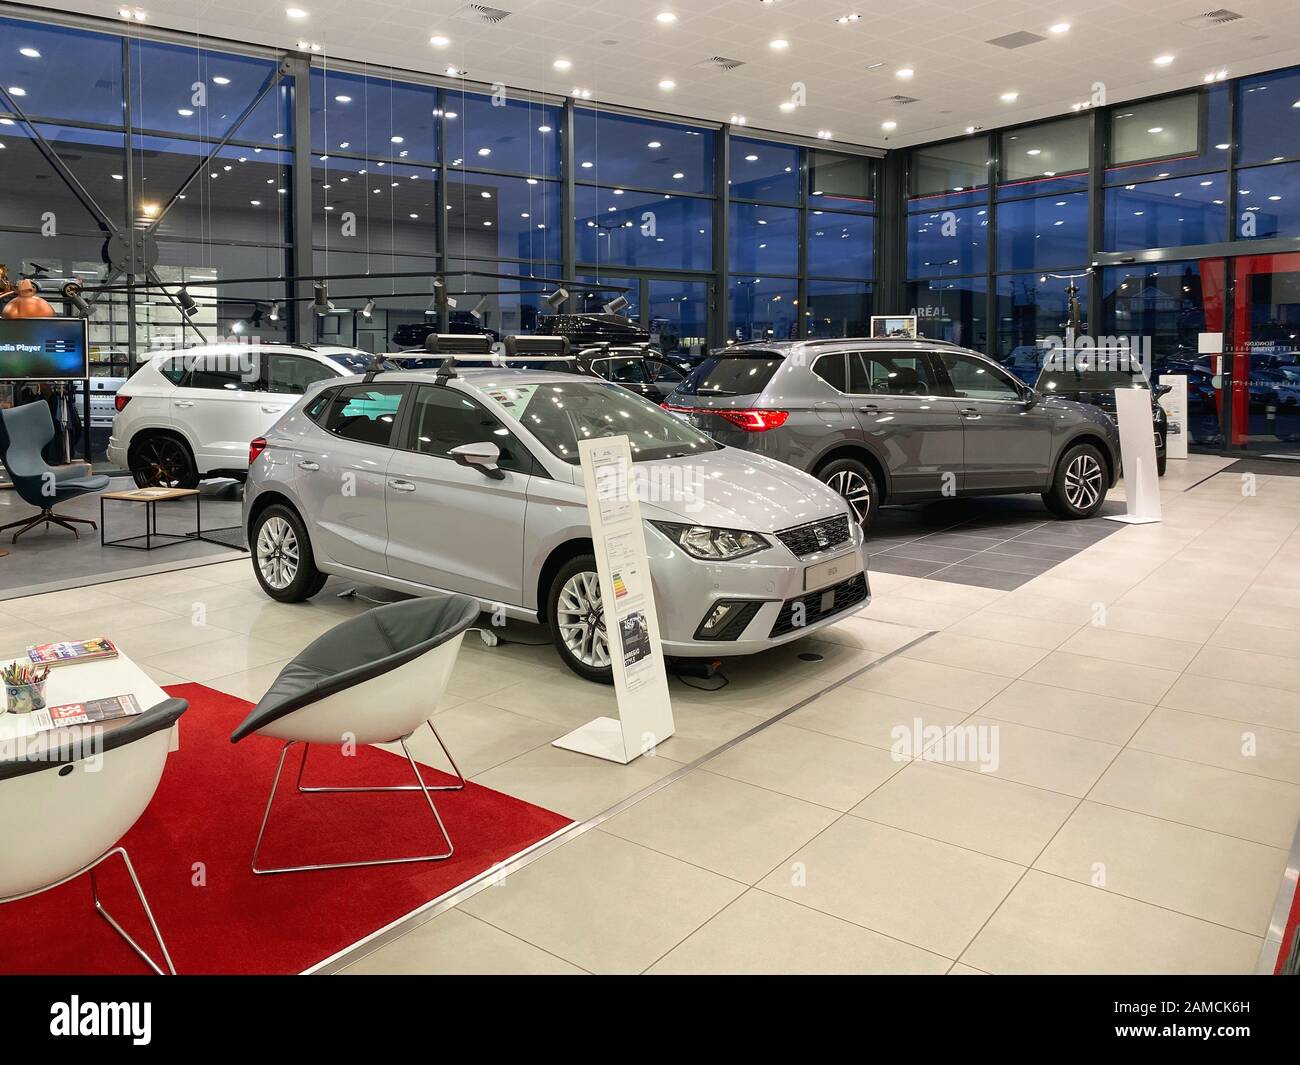 Paris, France - Oct 25, 2019: Wide angle view of empty car dealership showroom interior with multiple Seat Cars inside and focus on black Silver Ibiza four door model Stock Photo